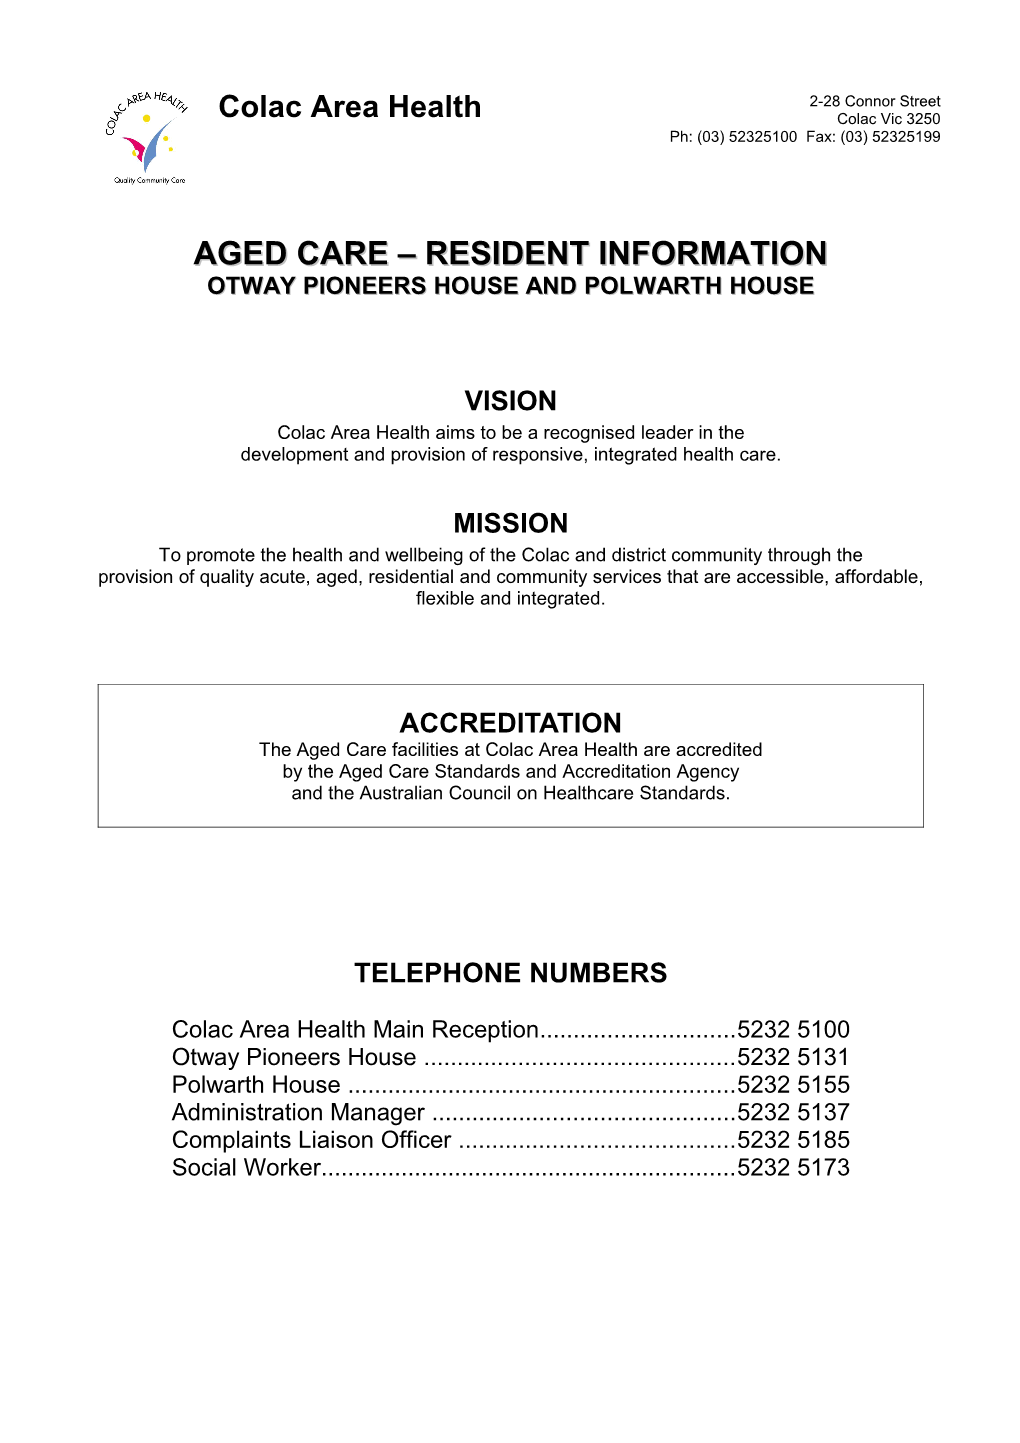 Your Guide to Aged Care